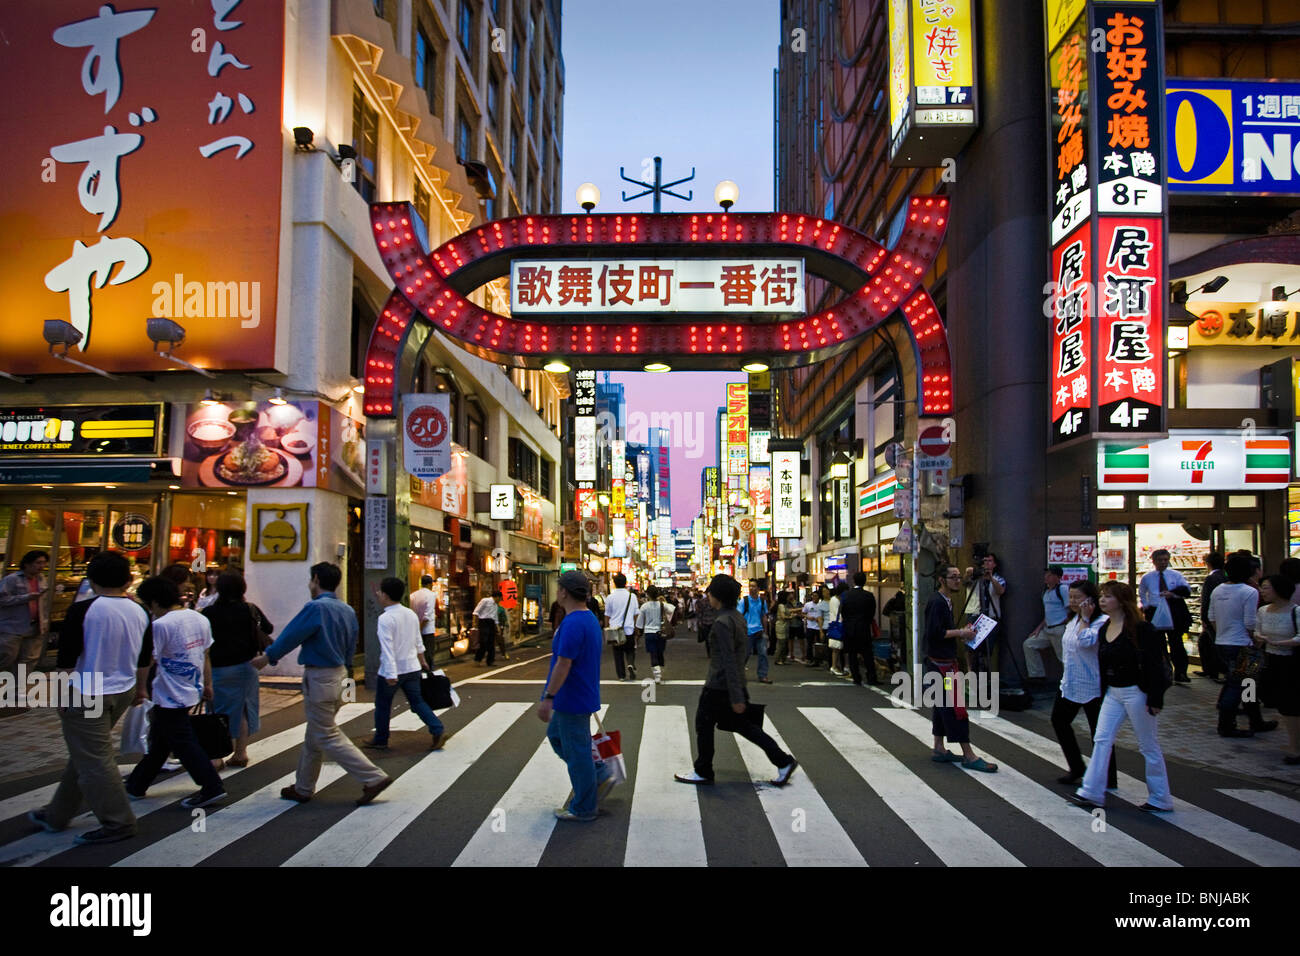 Japan Asia Tokyo town city Shinjuku East Side Kabukicho entertainment District shops dealings neon lights passers-by Stock Photo